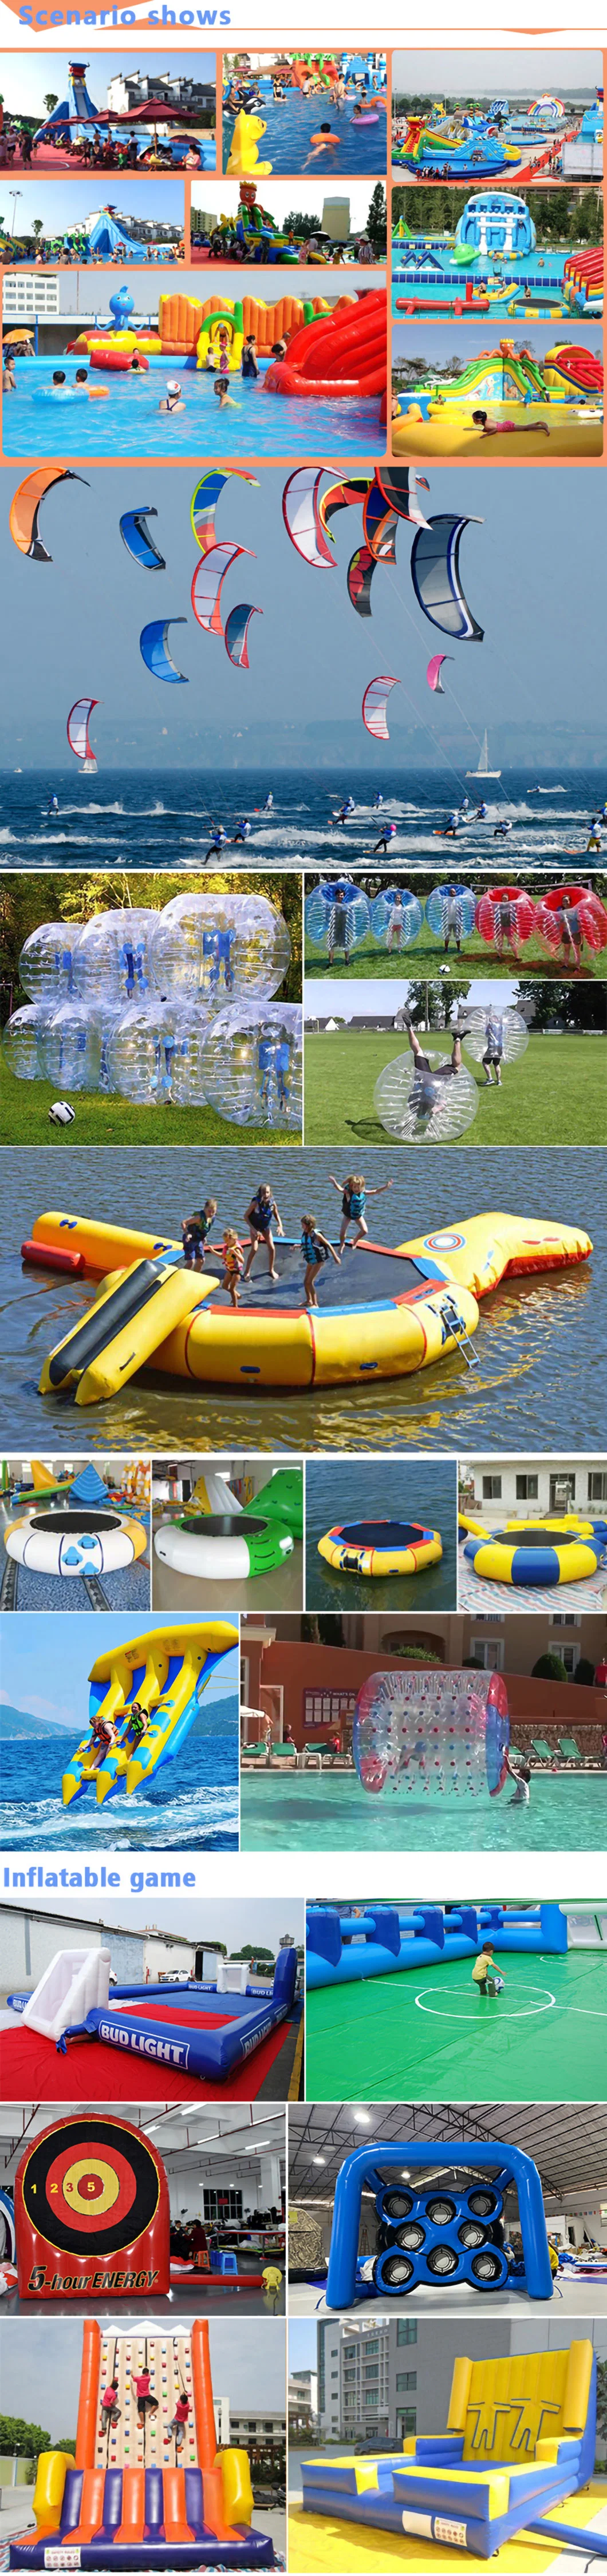 Factory Commercial Large Durable Water Bouncer Round Inflatable Floating Trampoline